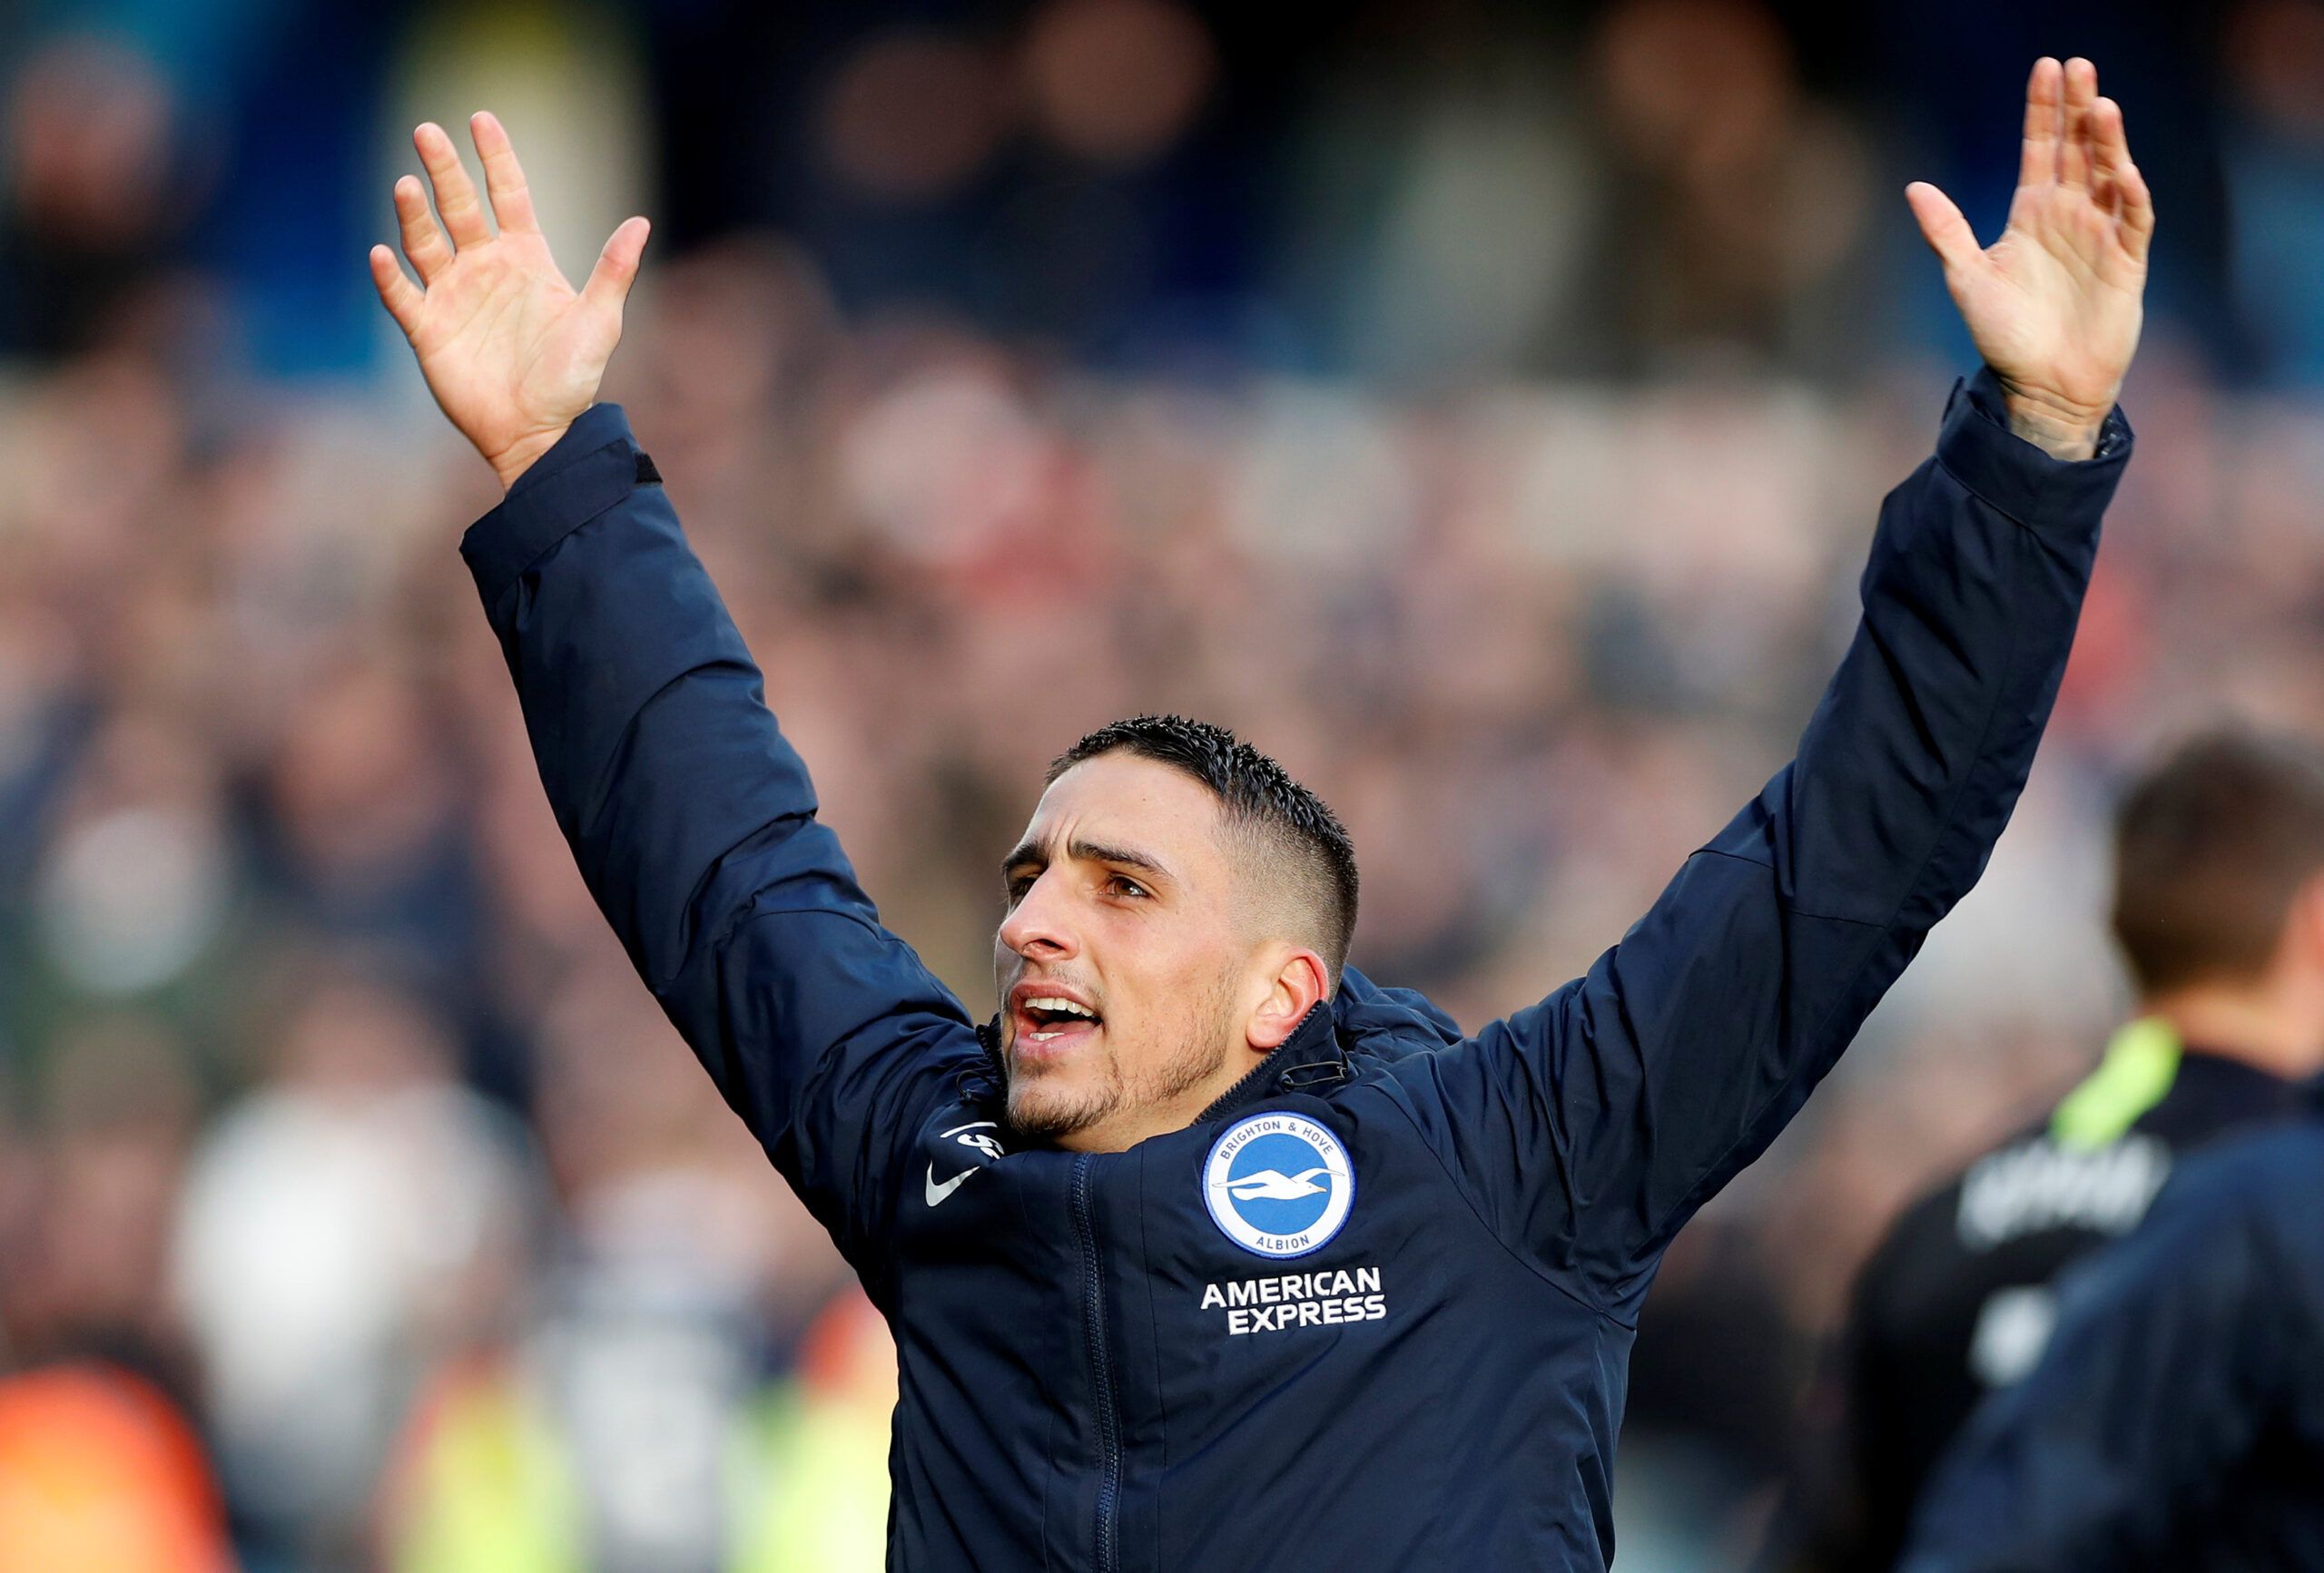 Soccer Football -  FA Cup Quarter Final - Millwall v Brighton &amp; Hove Albion  - The Den, London, Britain - March 17, 2019  Brighton's Anthony Knockaert celebrates after the match     Action Images via Reuters/Paul Childs